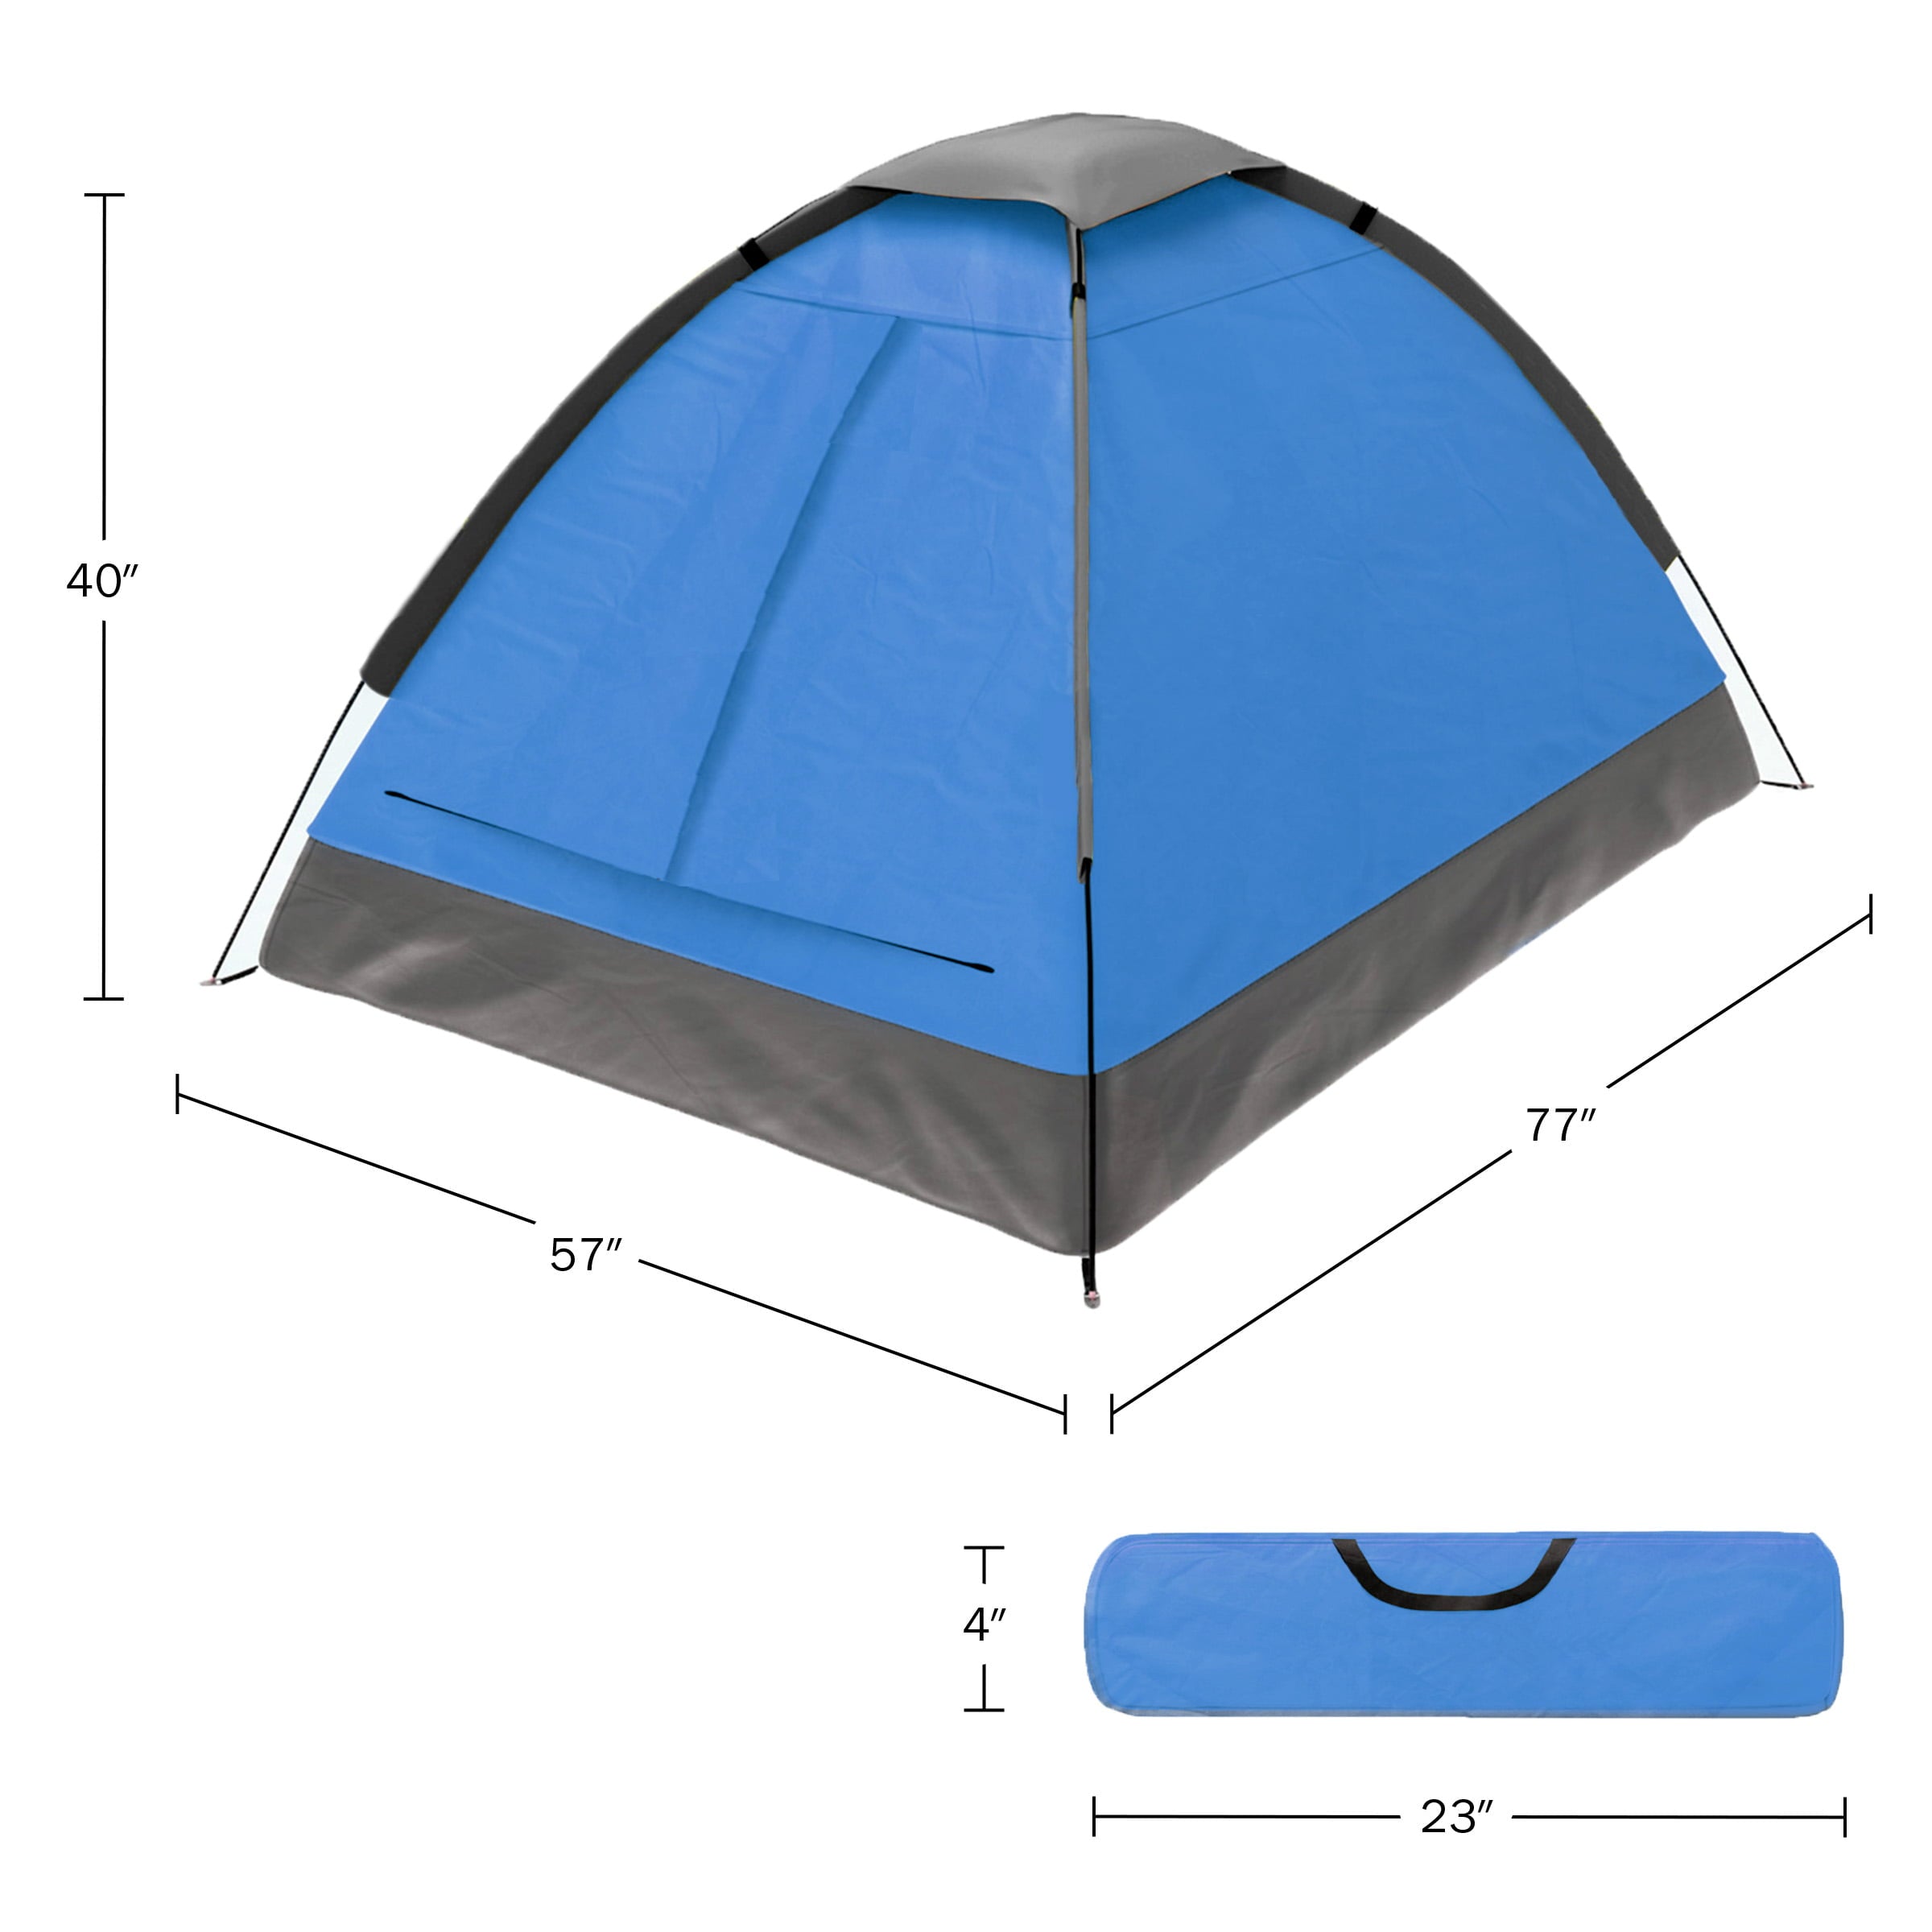 2 Person Camping Tent – Includes Rain Fly and Carrying Bag – Lightweight Outdoor Tent for Backpacking， Hiking， or Beach by Wakeman Outdoors (Blue)